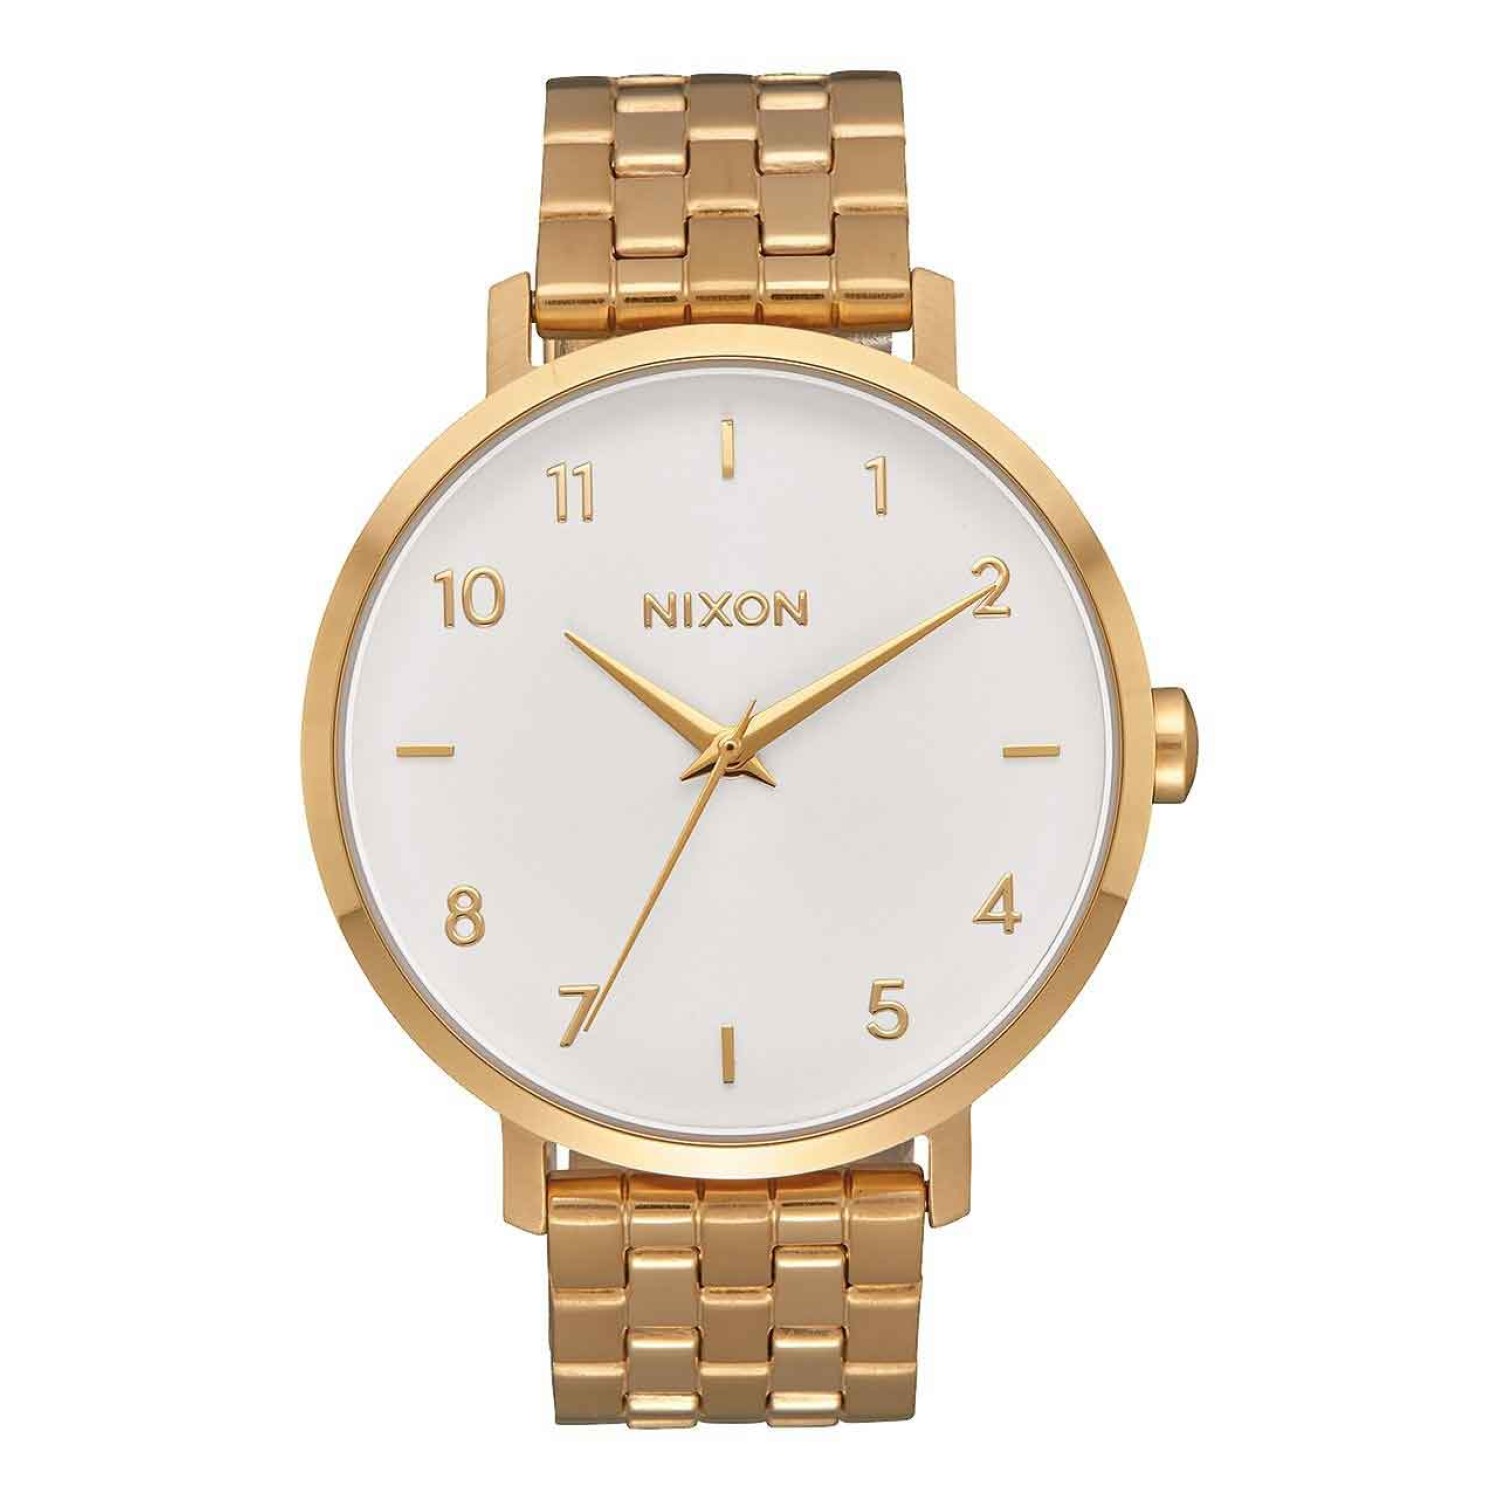 A1090-504-00 NIXON Womens Arrow Watch. A future heirloom is born at the intersection of fashion and function. Scandinavian influences and menswear inspired details make the Arrow a modern classic. - All Yellow Gold with White Dial2 Year  Guarantee O @chri